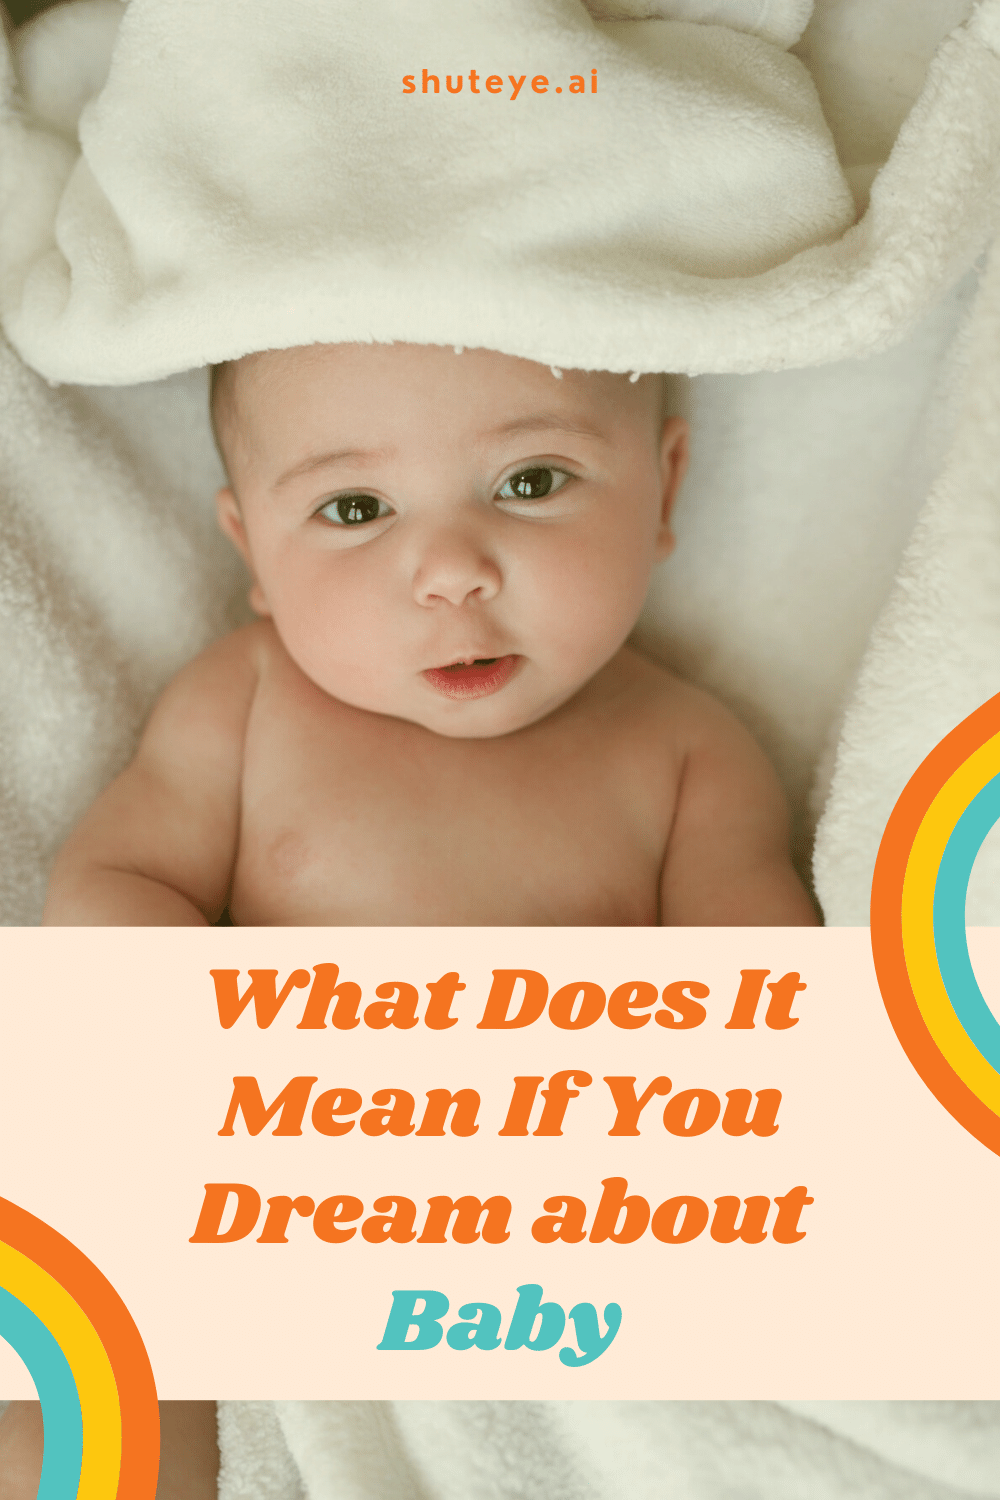 What Does It Mean If You Dream about Baby